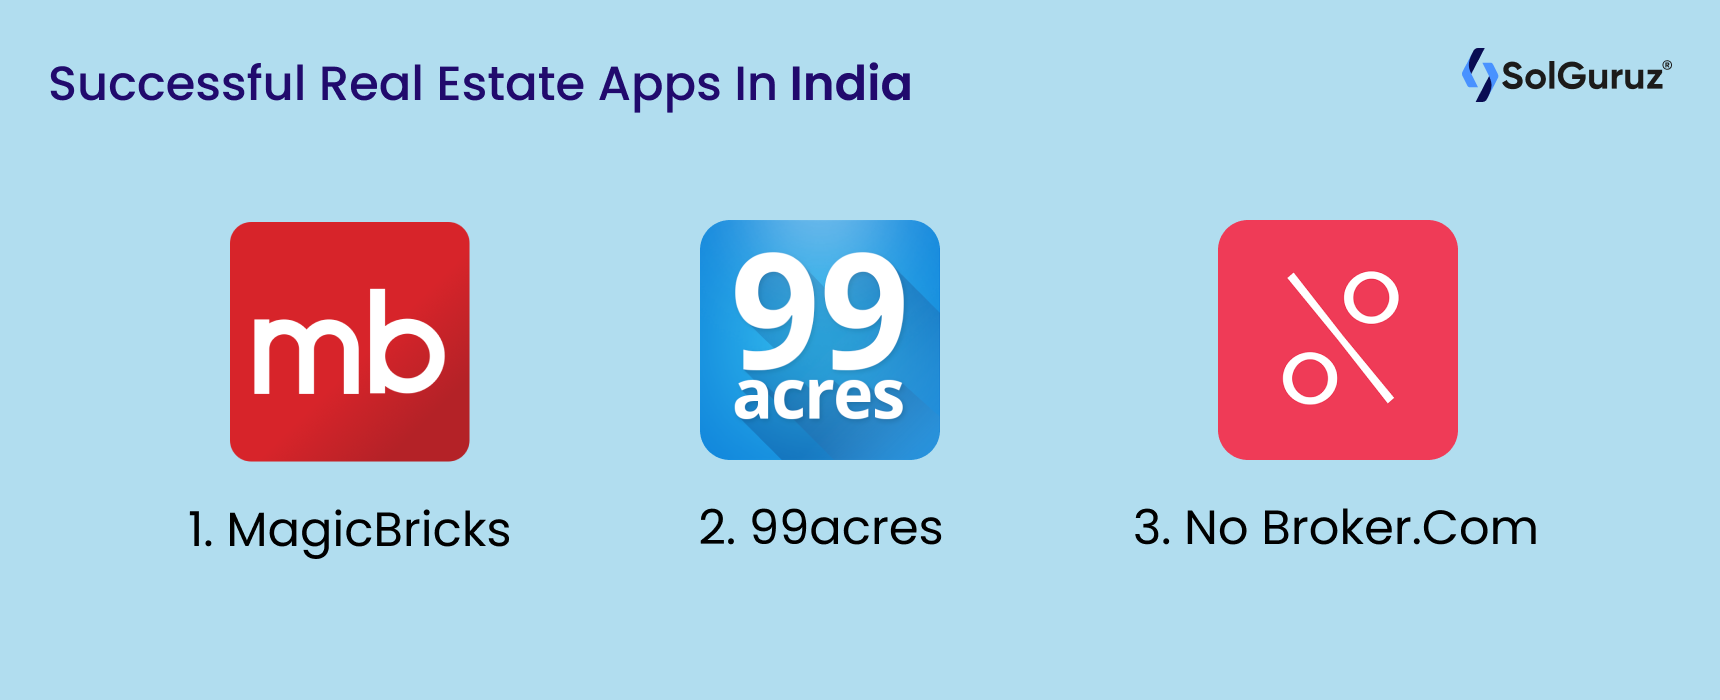 Successful real estate apps in India